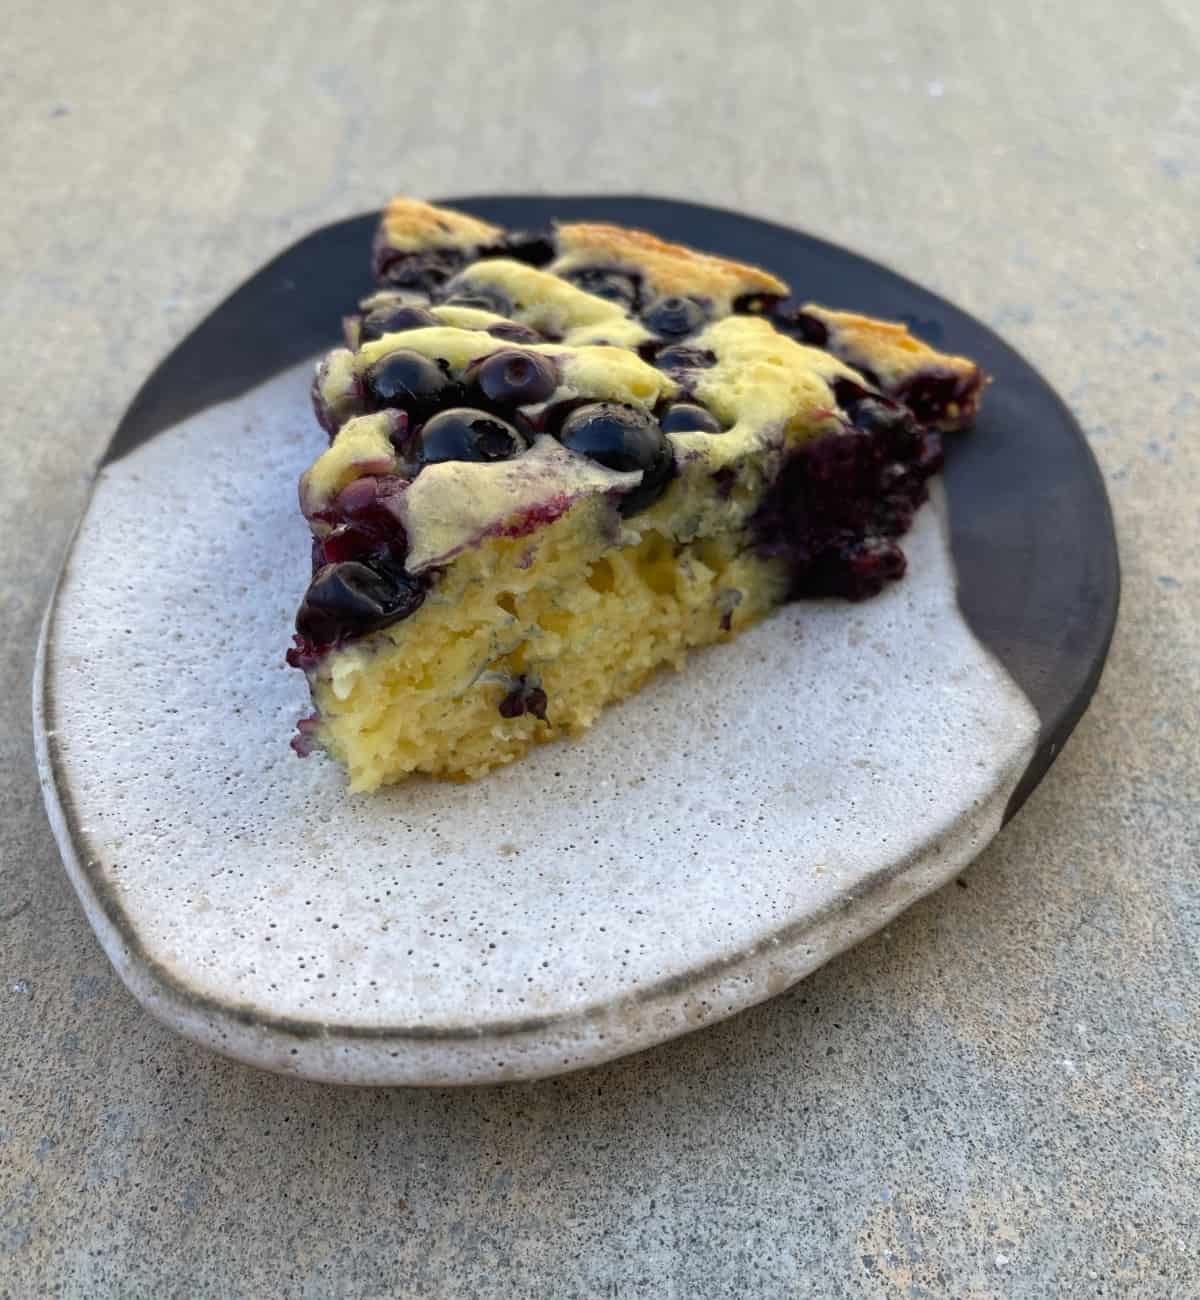 Piece of blueberry oven pancake on ceramic plate.